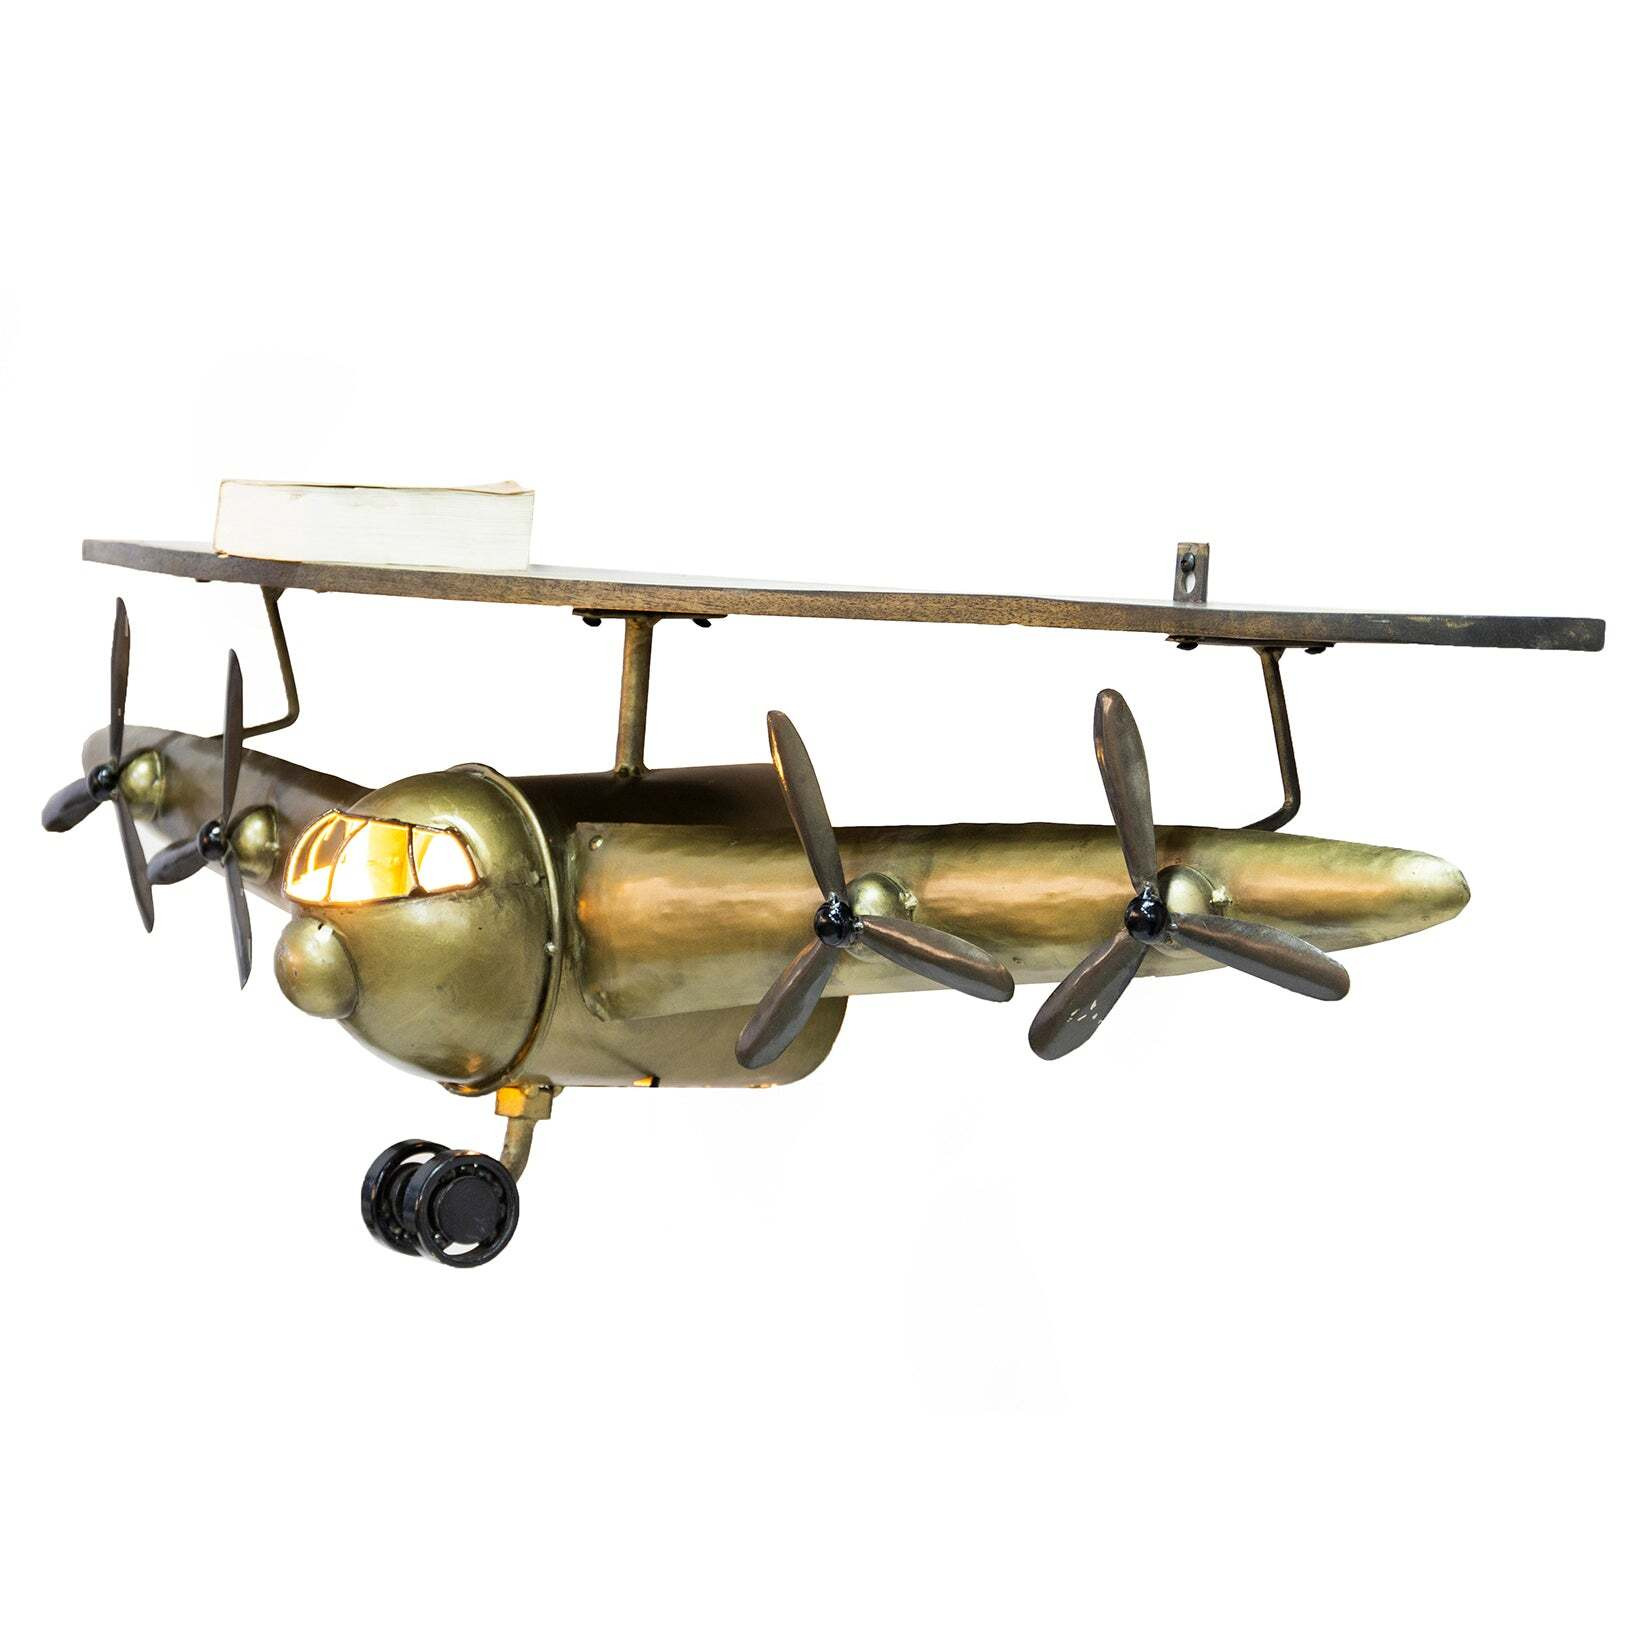 Aviator Wall Mounted Shelf with Light and Propellers - image 1